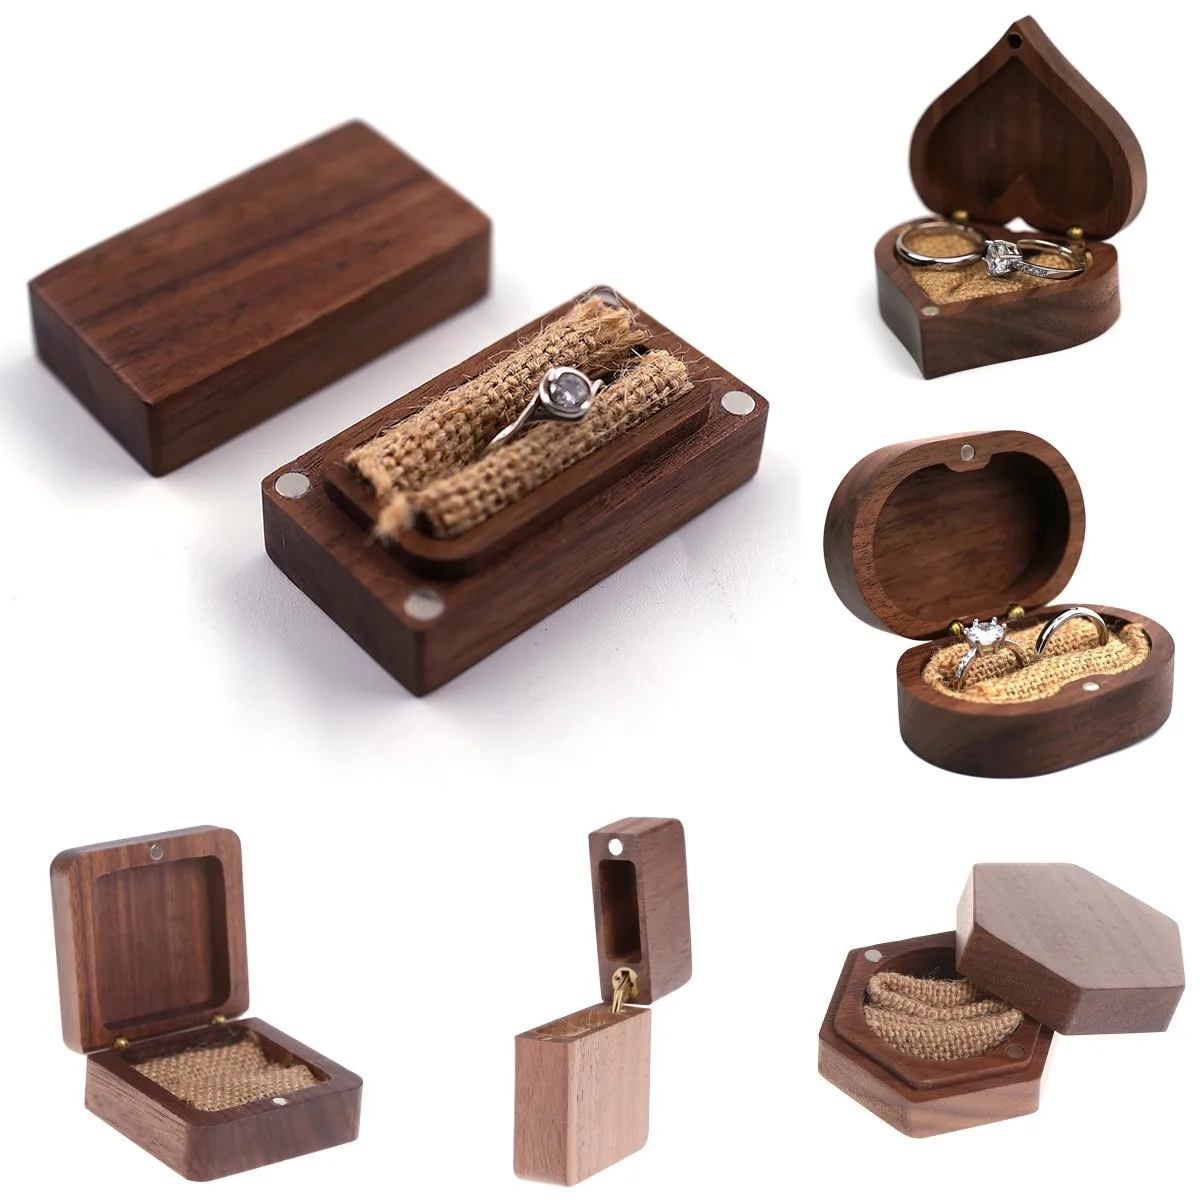 1Pc Wood Engagement Ring Bearer Box Rustic Bride & Groom Wedding Ring Box Pillow Square/Round Gift Wooden Jewelry Box 1pcs heart shape rose flowers ring box romantic wedding jewelry case ring bearer pillow cushion holder valentine s day gift